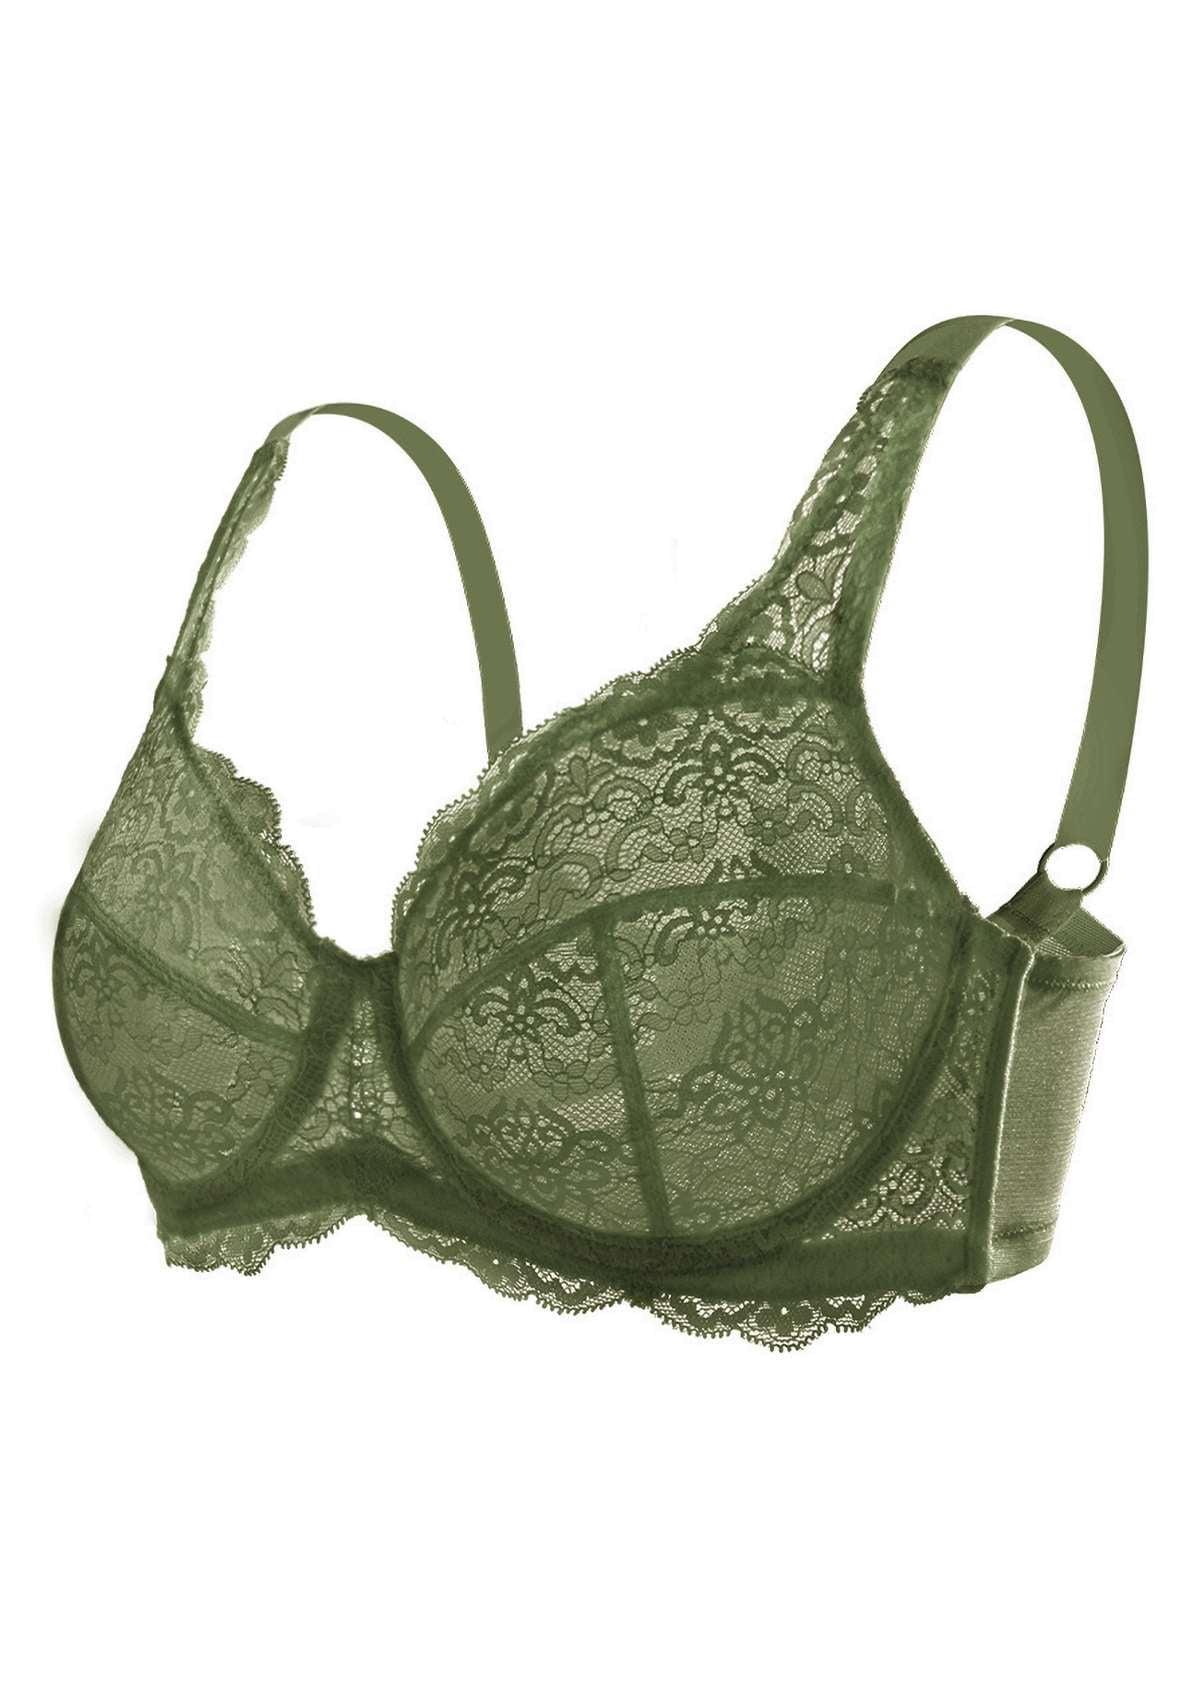 HSIA All-Over Floral Lace Unlined Bra: Minimizer Bra For Heavy Breasts - Dark Green / 34 / D